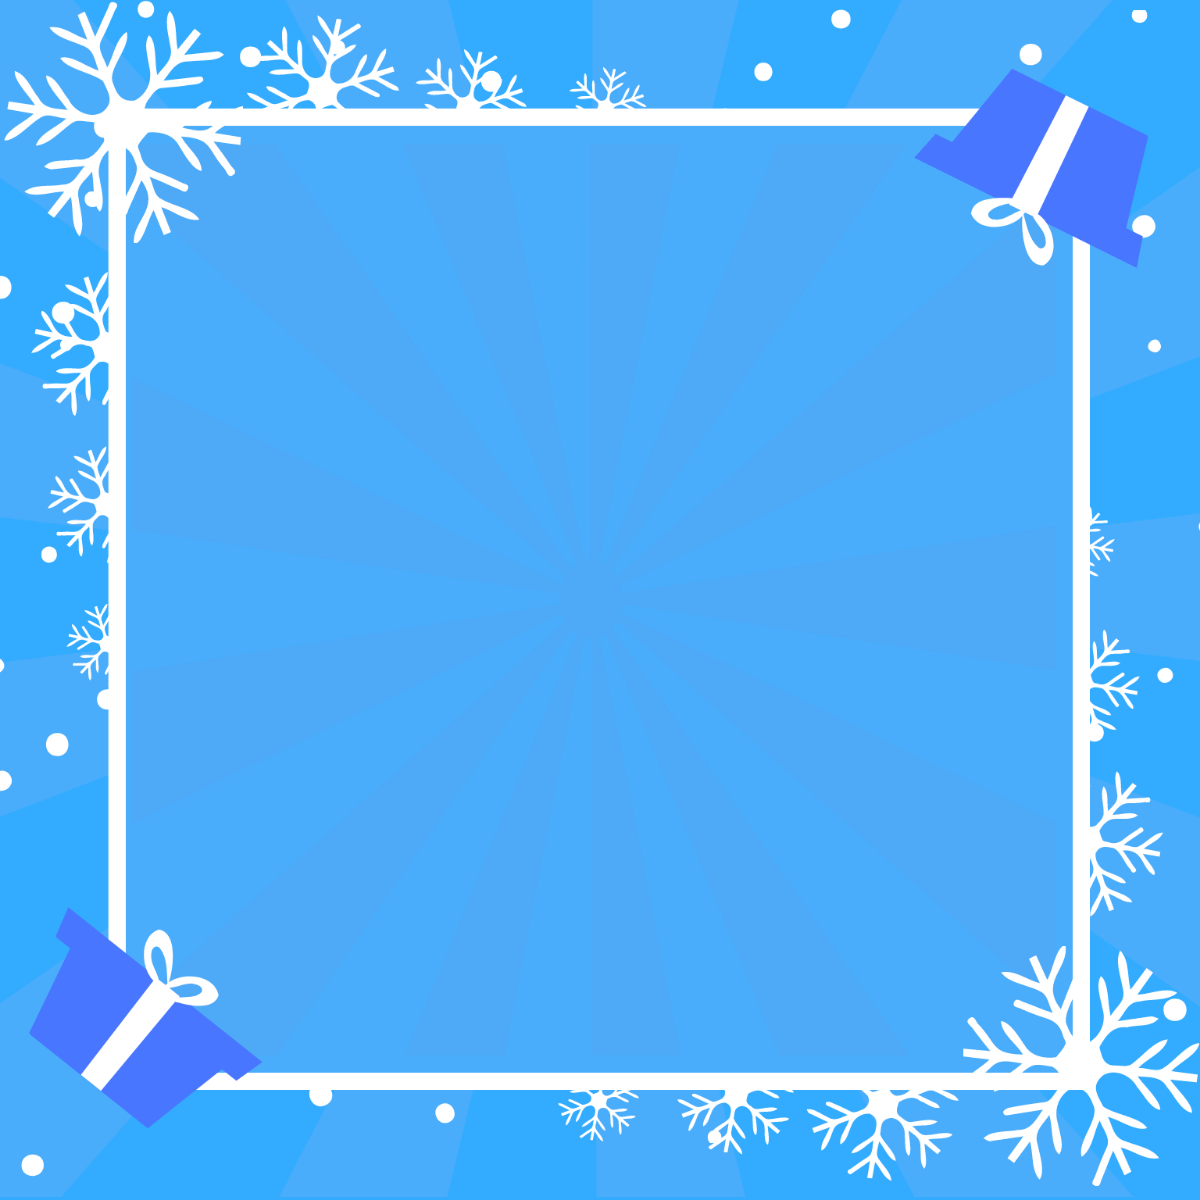 Boxing Day Border Vector Template